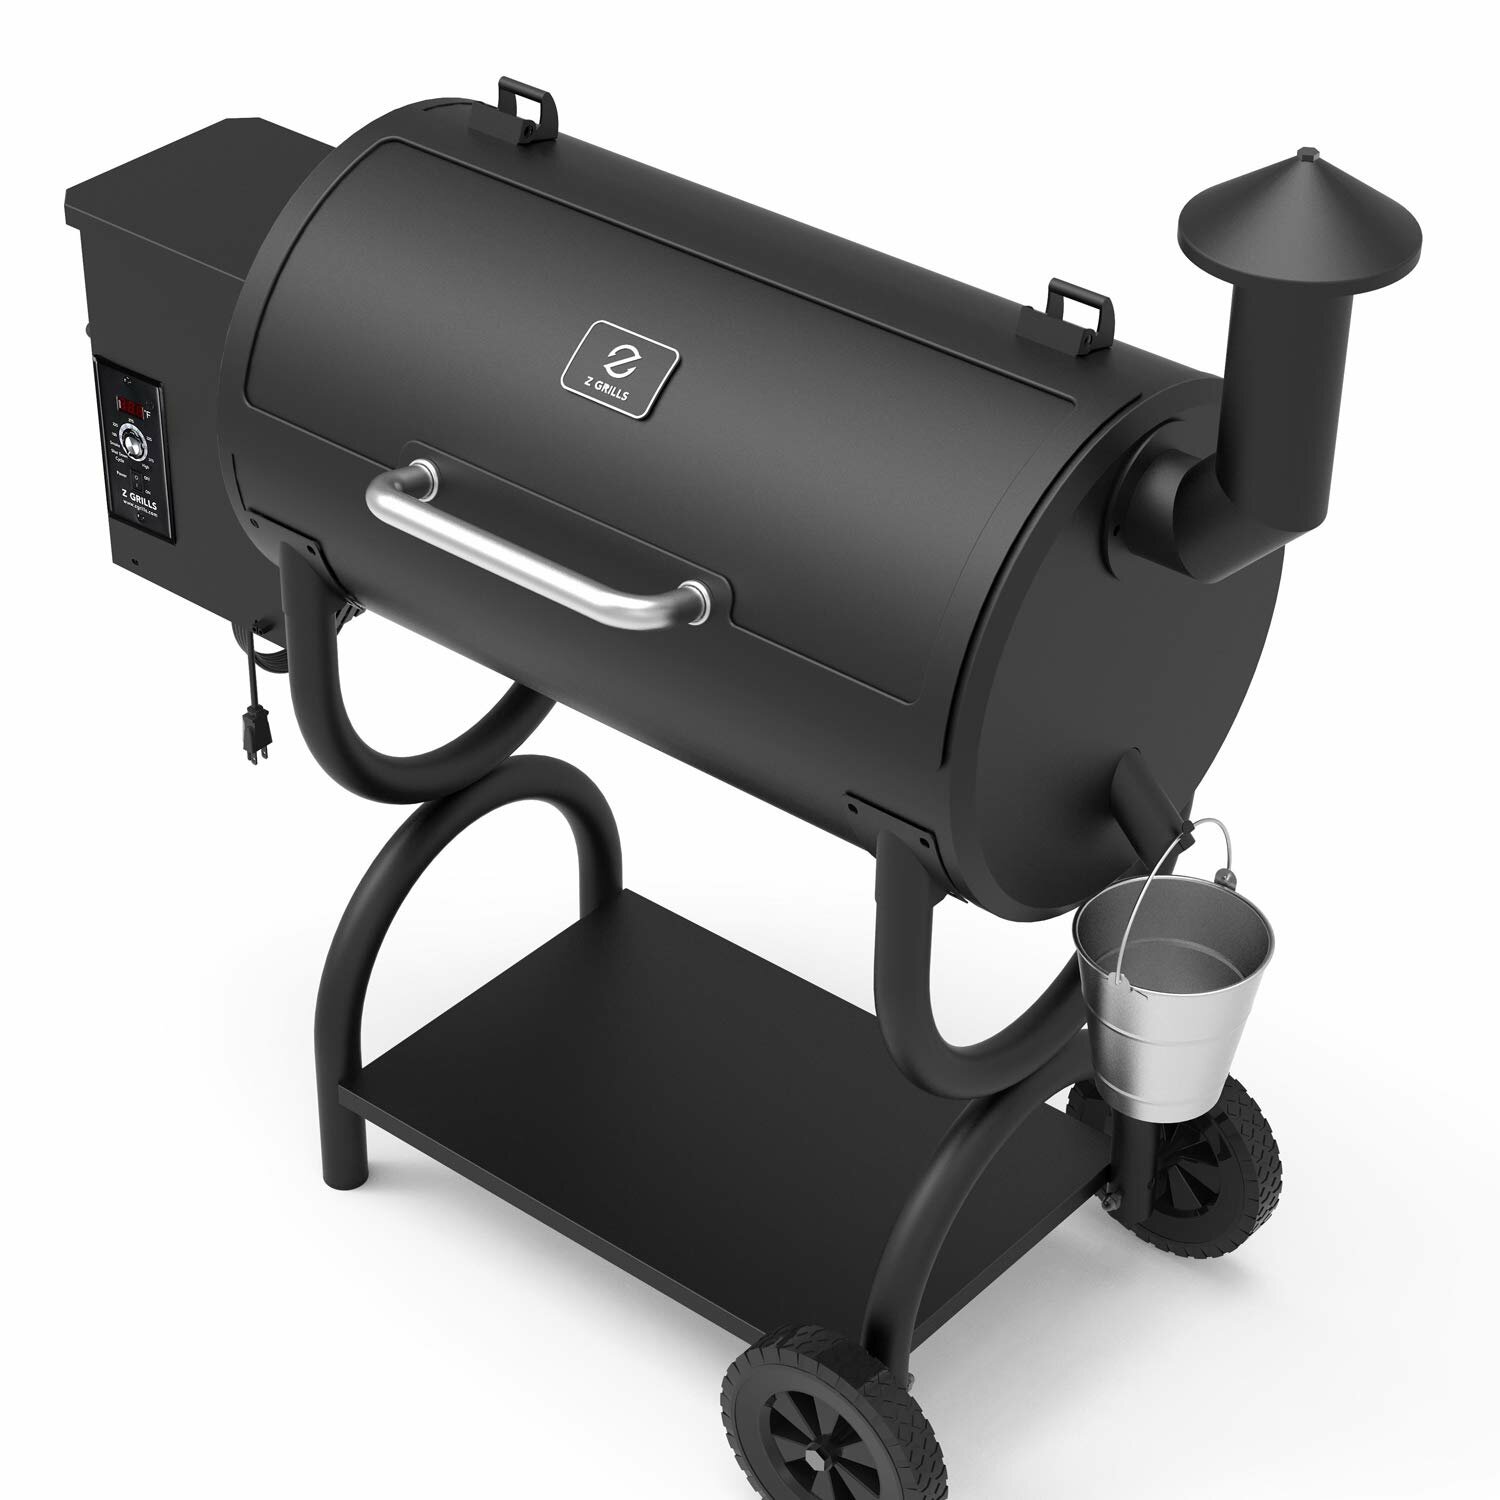 Z GRILLS Wood Pellet Grill and Smoker Ourdoor with Bluetooth Wireless –  Modern Muse Home